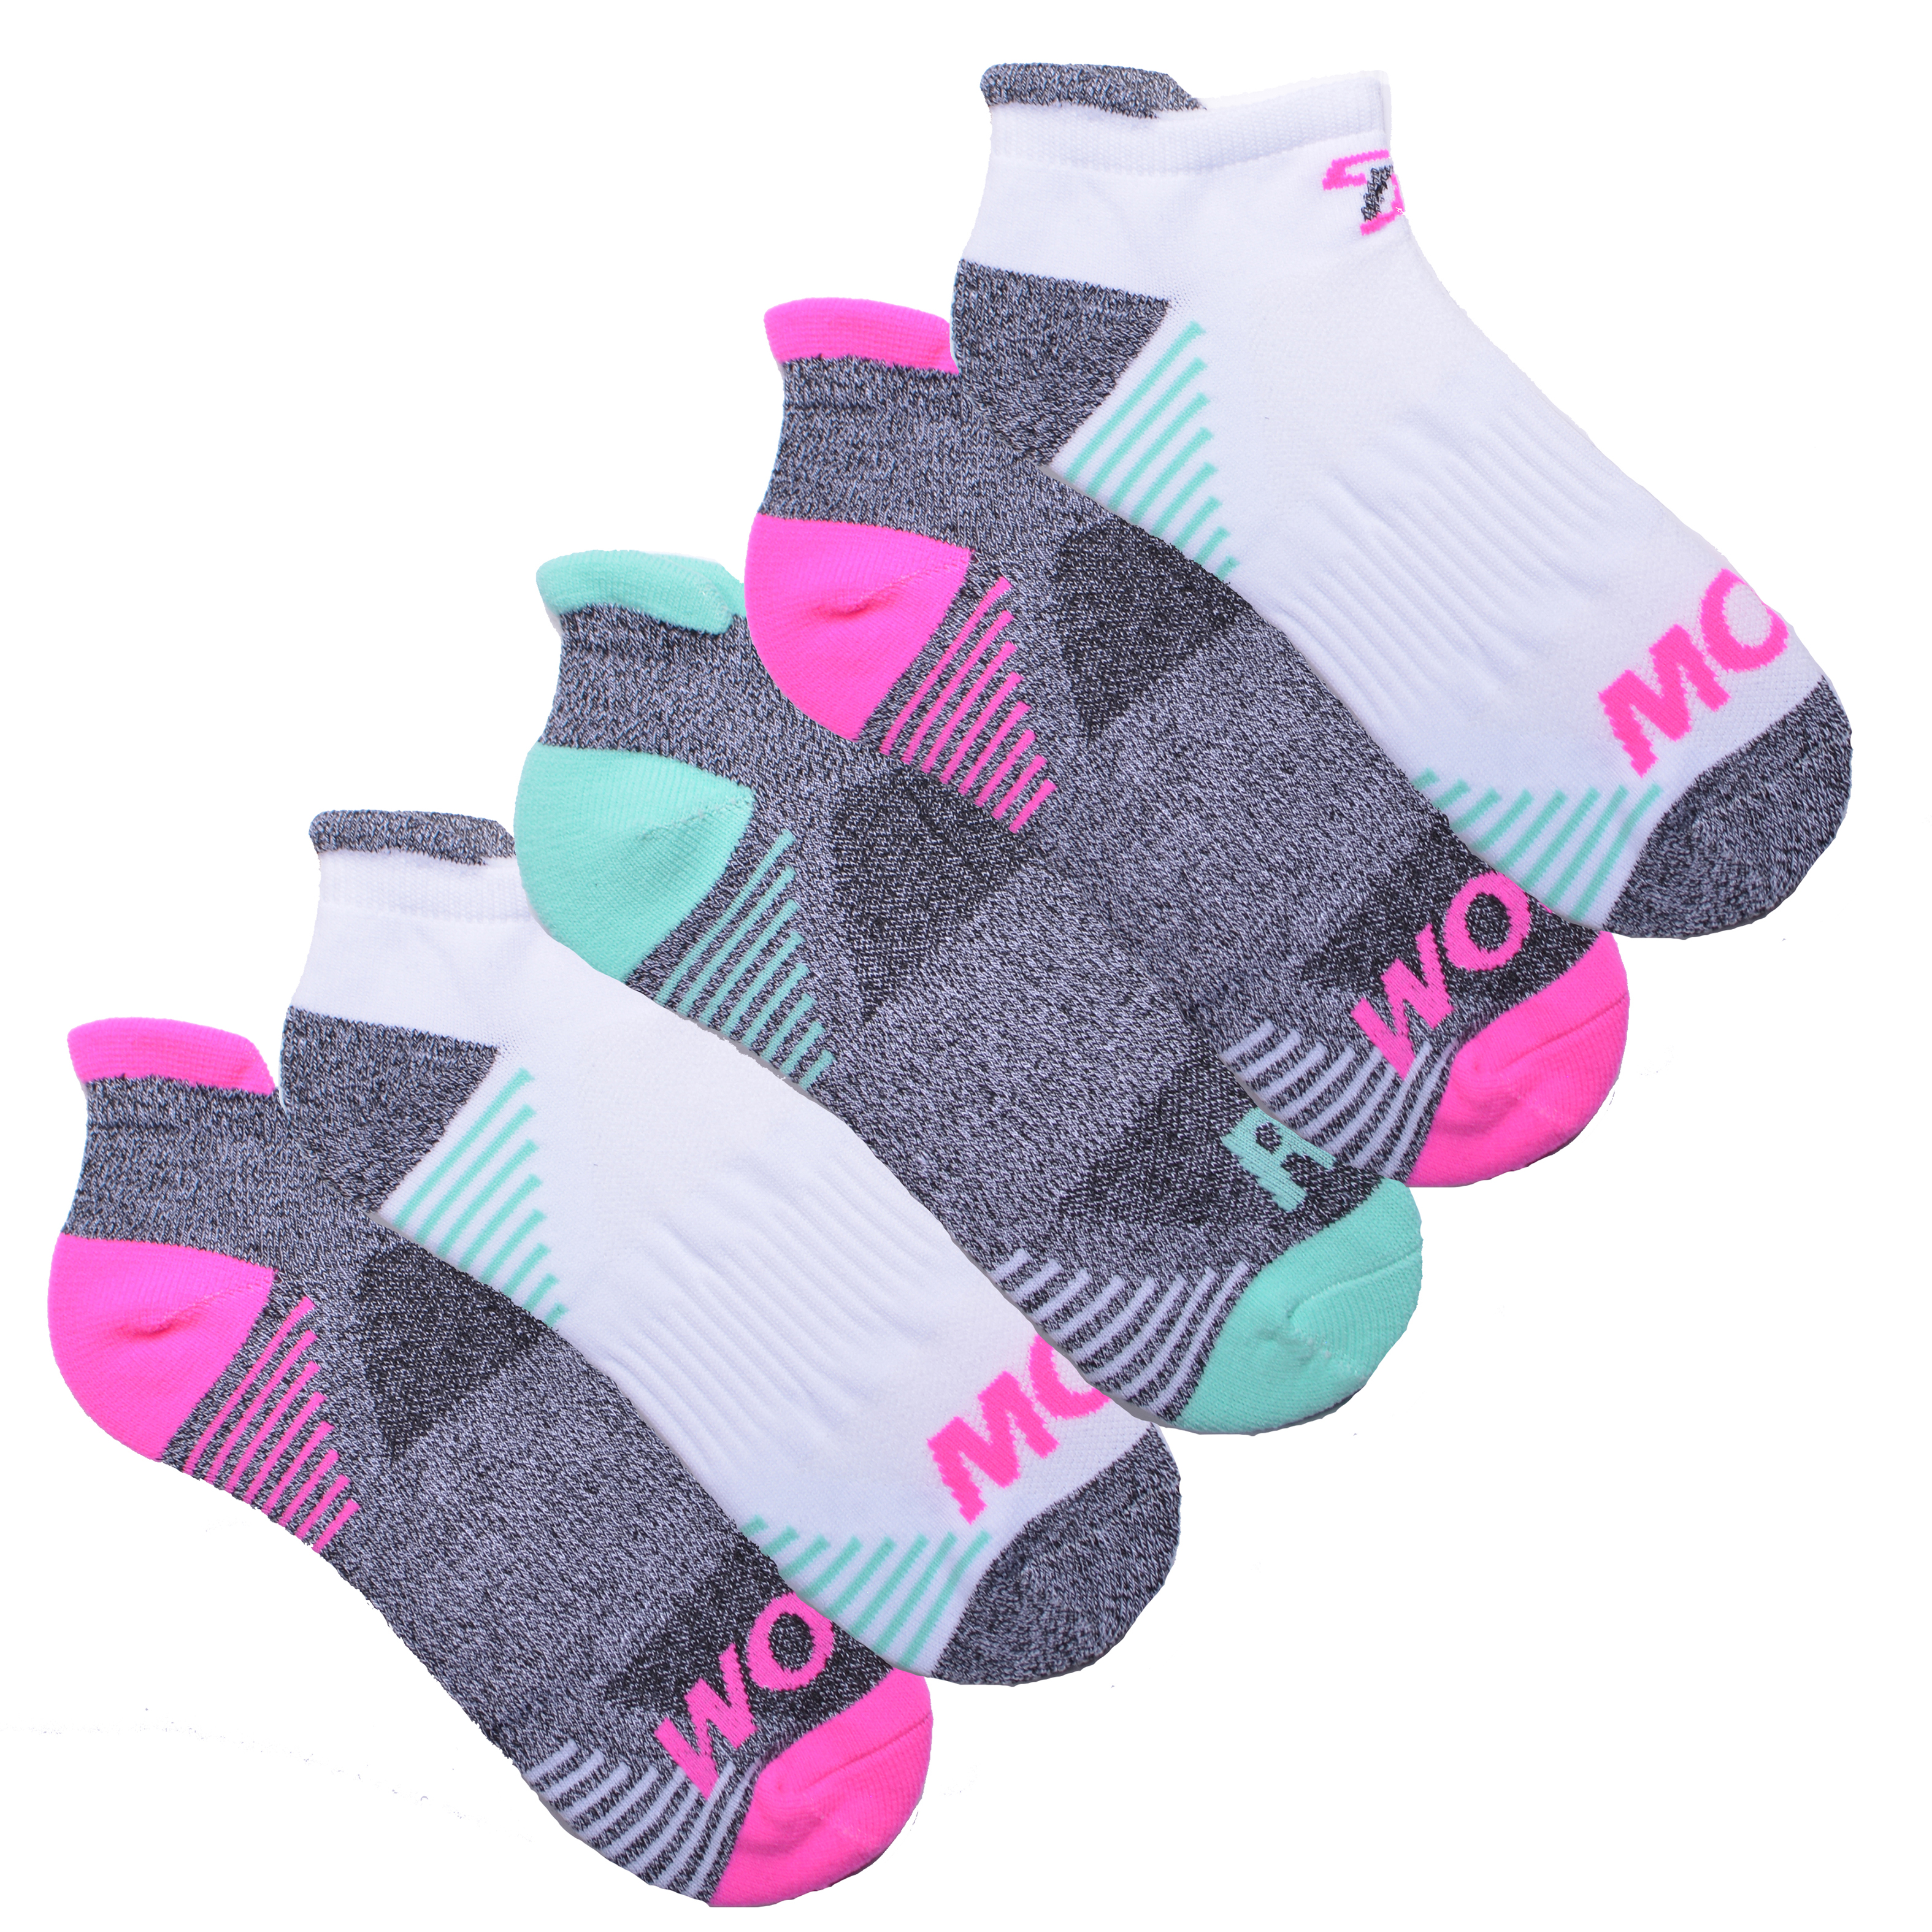 New Ladies Cotton Rich Plain Sport Trainer Liner Invisible Gym Socks by ProHike 